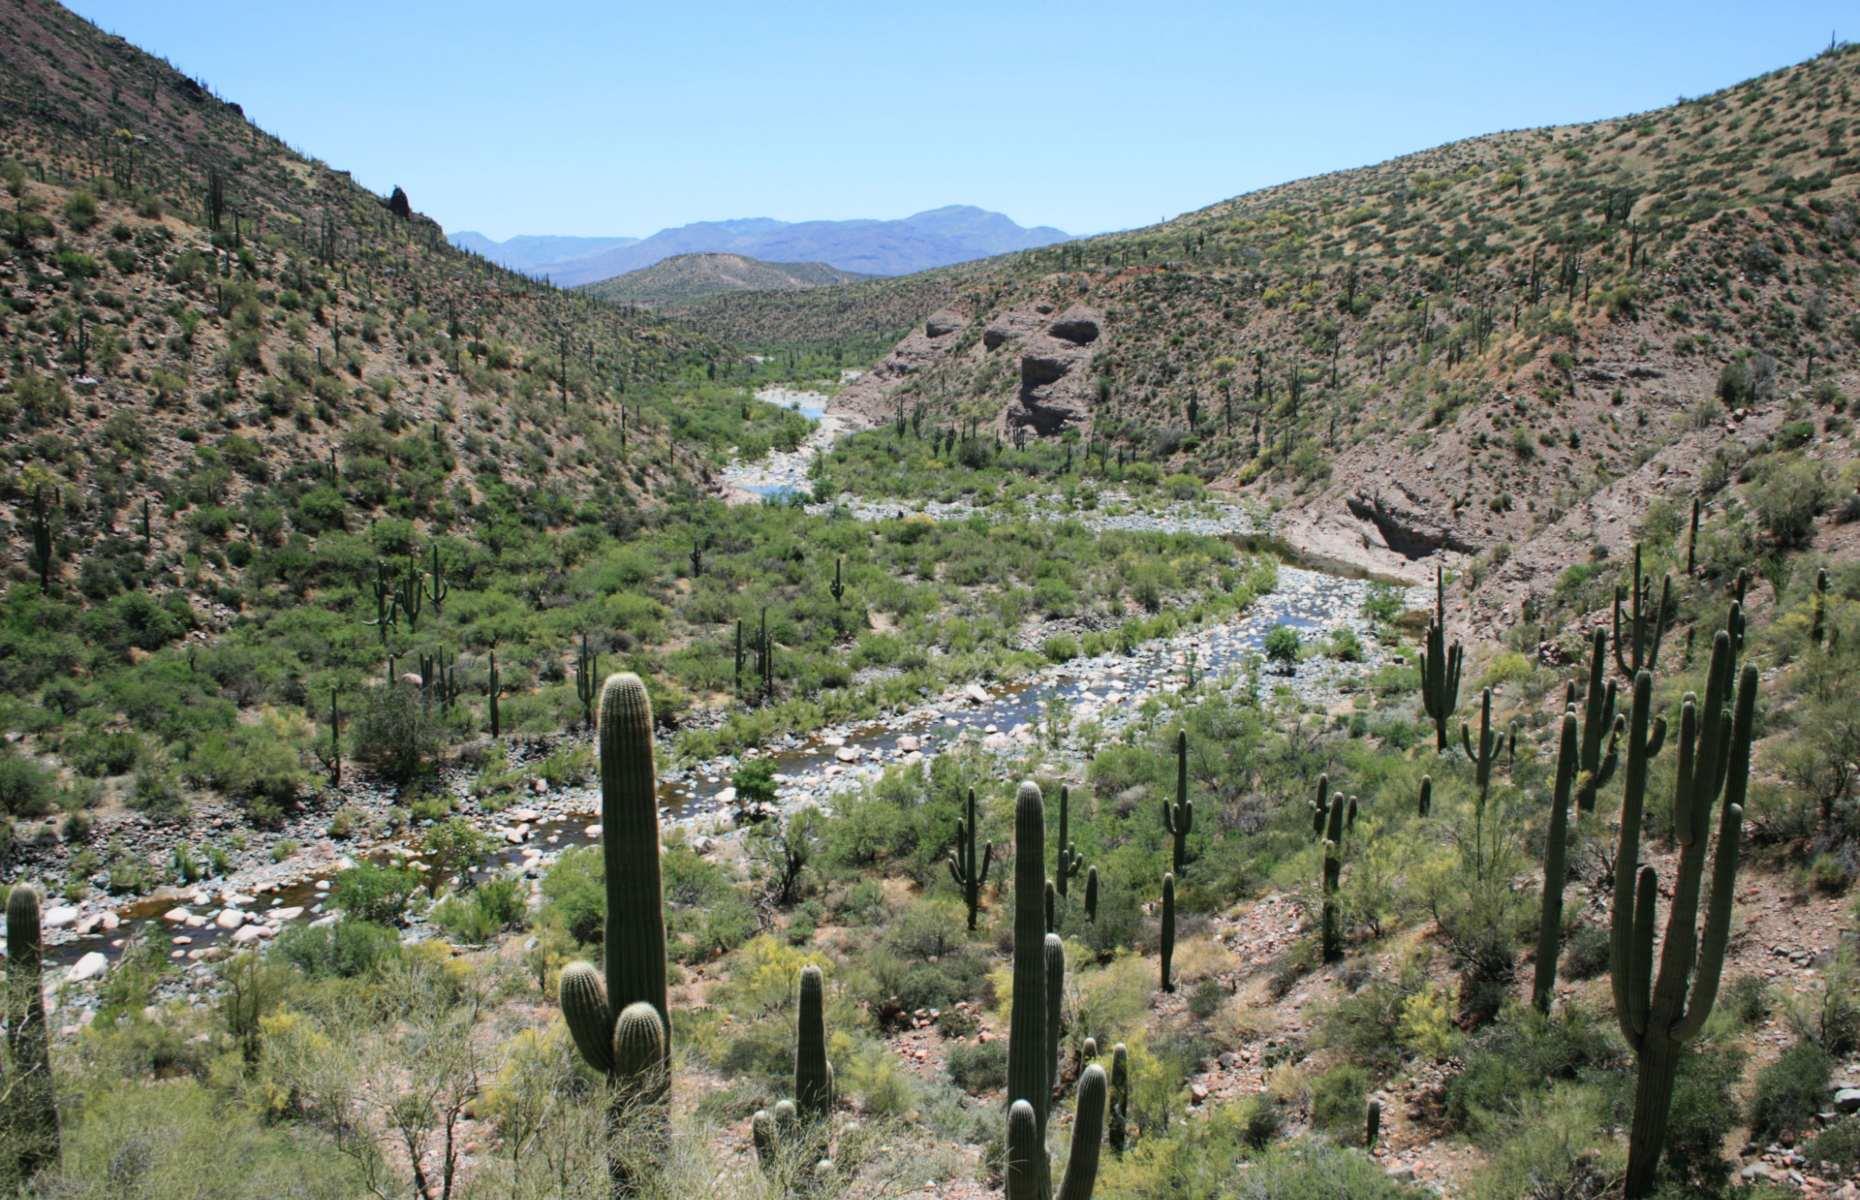 <p>Hankering after crystal clear waters and cactus-studded valleys? Salome Creek, tucked within central Arizona’s Sierra Ancha Mountains, is just the ticket. The lower part of the canyon is home to a mile-long (1.6km) stretch of water known as The Jug, which you can part-swim, part-wade through, during a stunning <a href="https://www.summitpost.org/salome-canyon-the-jug/361867">five-mile (8km) circular hike</a>. It’s best to join a guided tour to visit unless you’re experienced at scaling canyons, as there’s a 50-foot (15m) waterfall at the end which you must abseil down. </p>